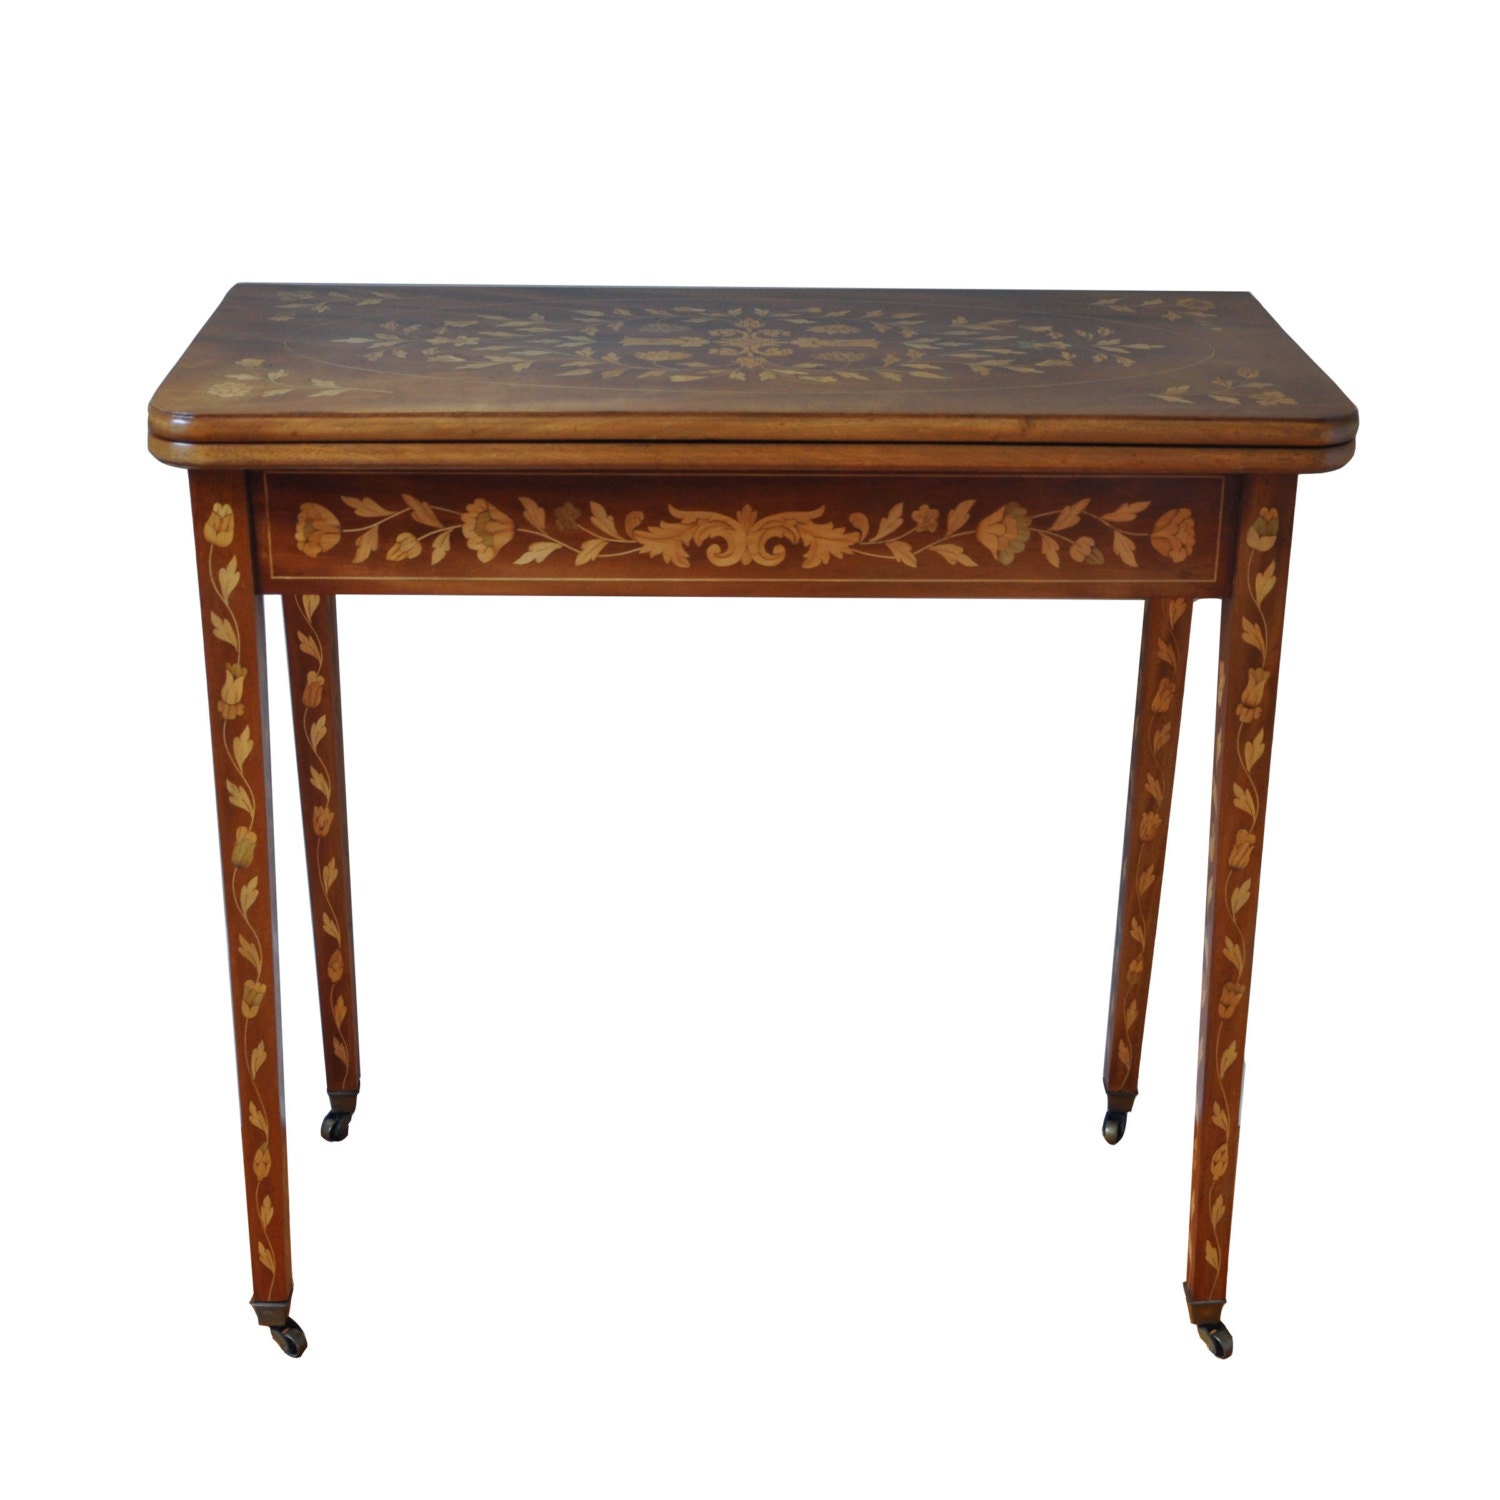 BELDING HALL MFG. Co. Oak Folding Table, Sewing Table, Campaign Table, Fold  Flat, Card Table, Gorgeous Antique 